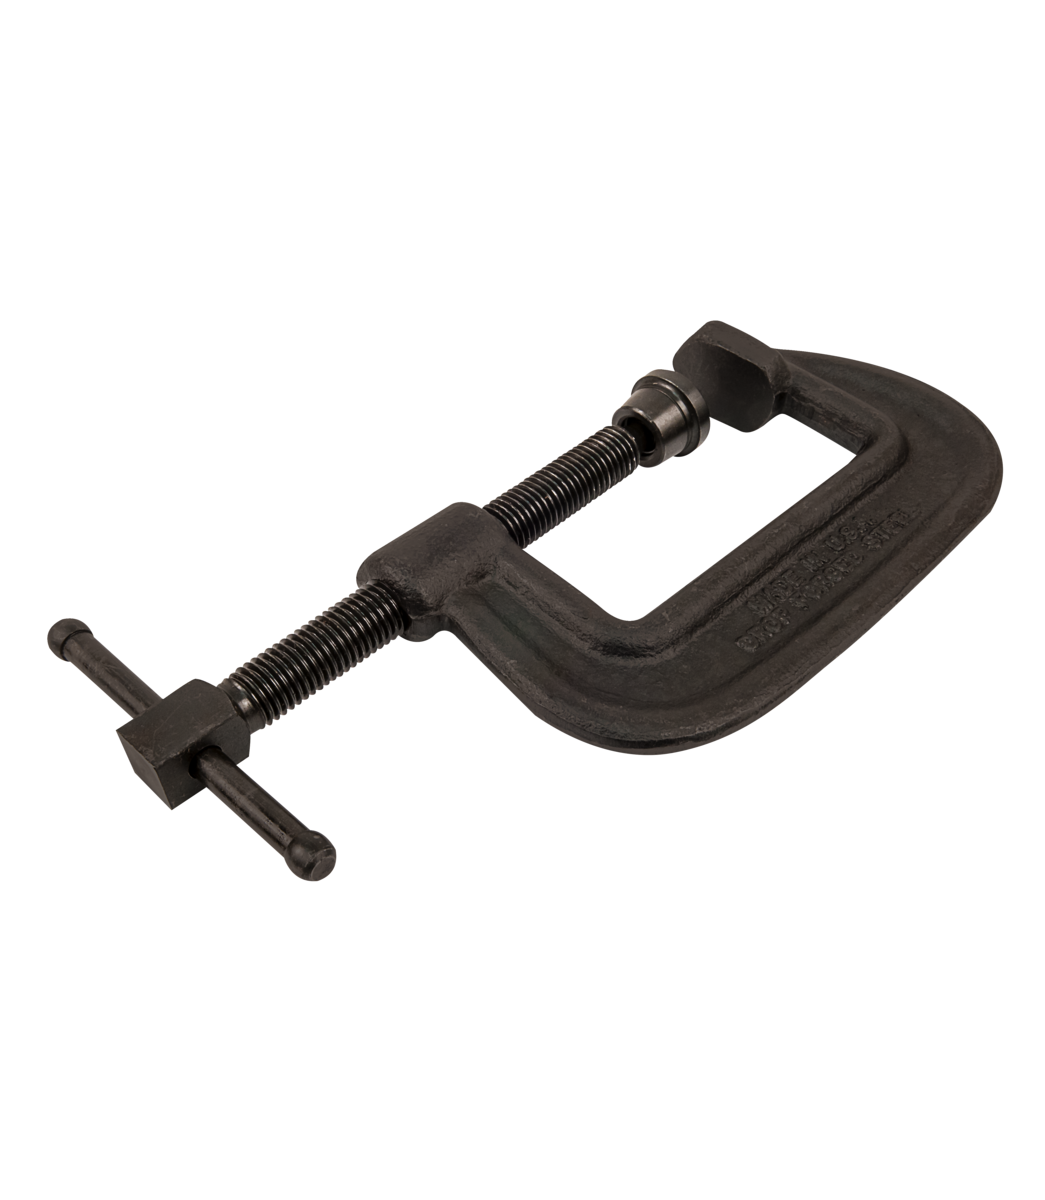 WILTON 100 Series Forged C-Clamp - Heavy-Duty 6-15/16 - 11-9/16” Opening Capacity